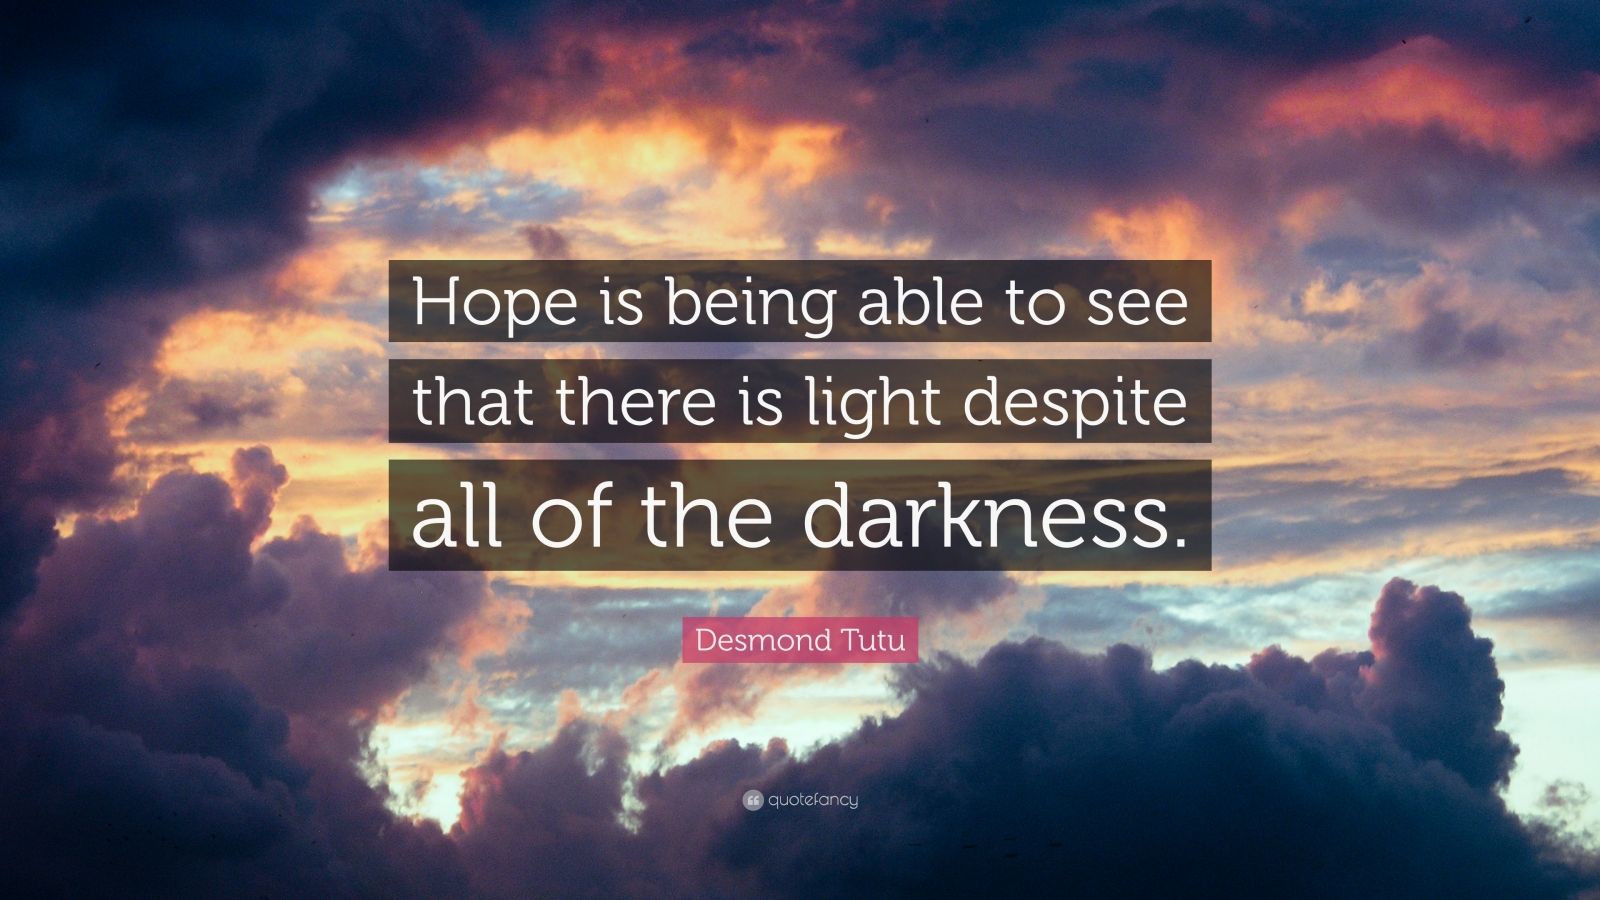 4683368 Desmond Tutu Quote Hope is being able to see that there is light